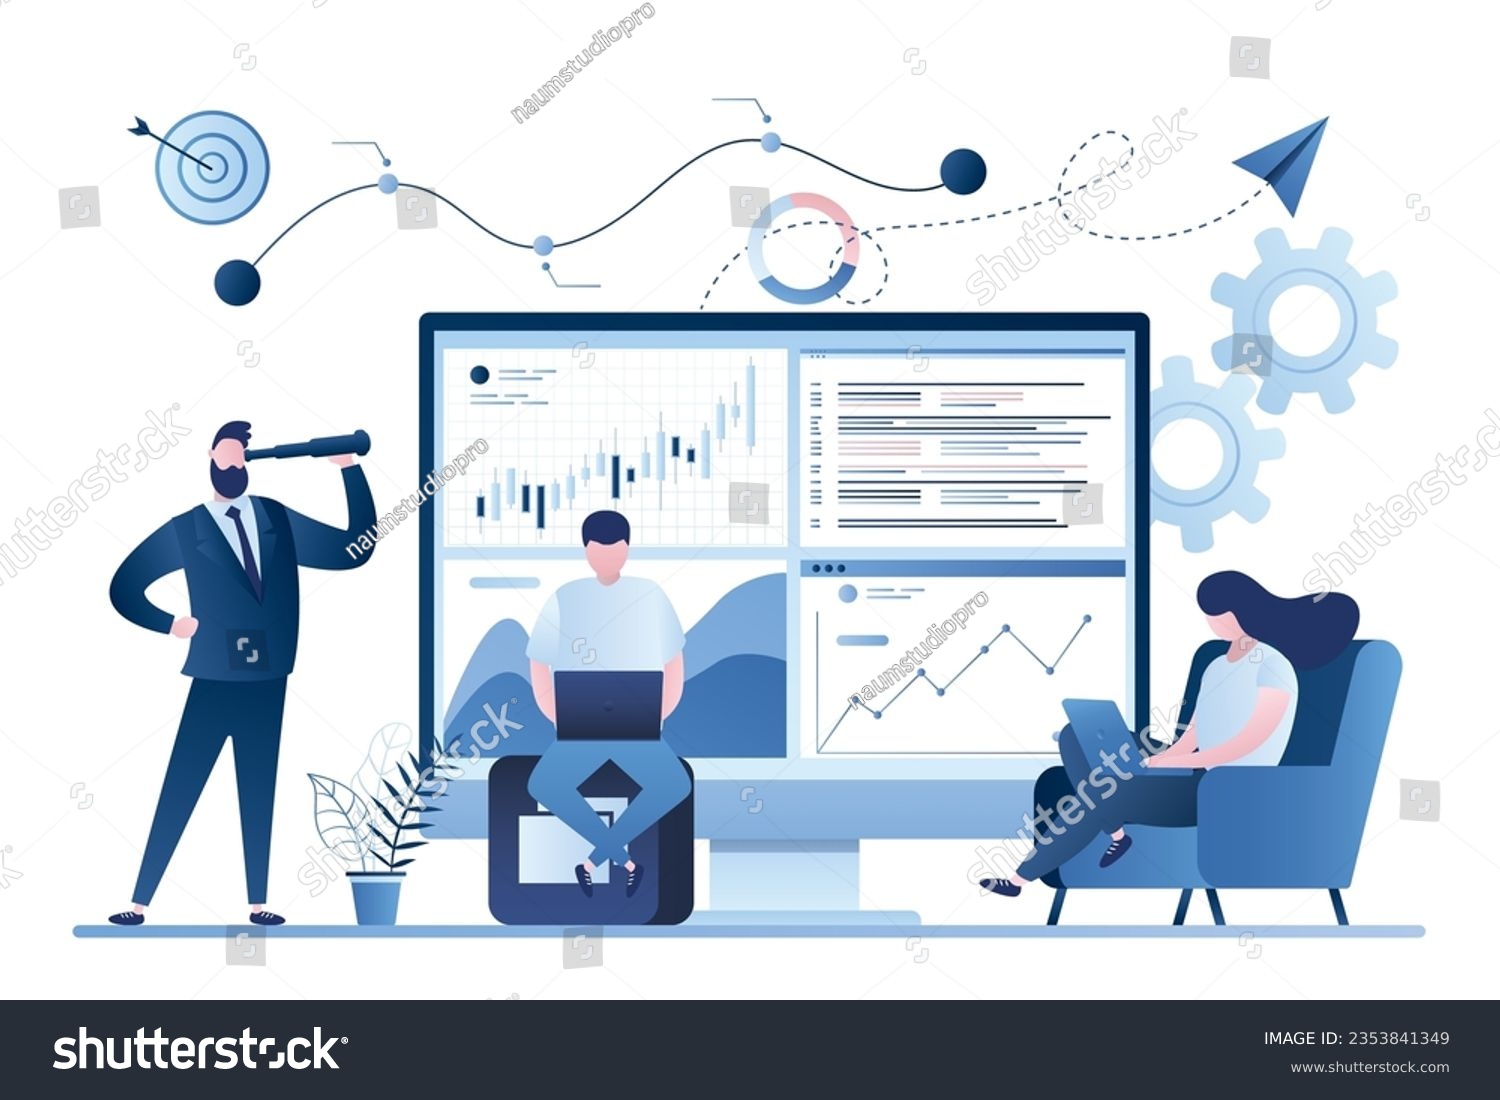 SVG of Stock market, financial analysis. Business analyst working. Profit, Revenue Forecast. Businesspeople trade in financial markets. Male boss investor. Trendy style background. Vector illustration svg